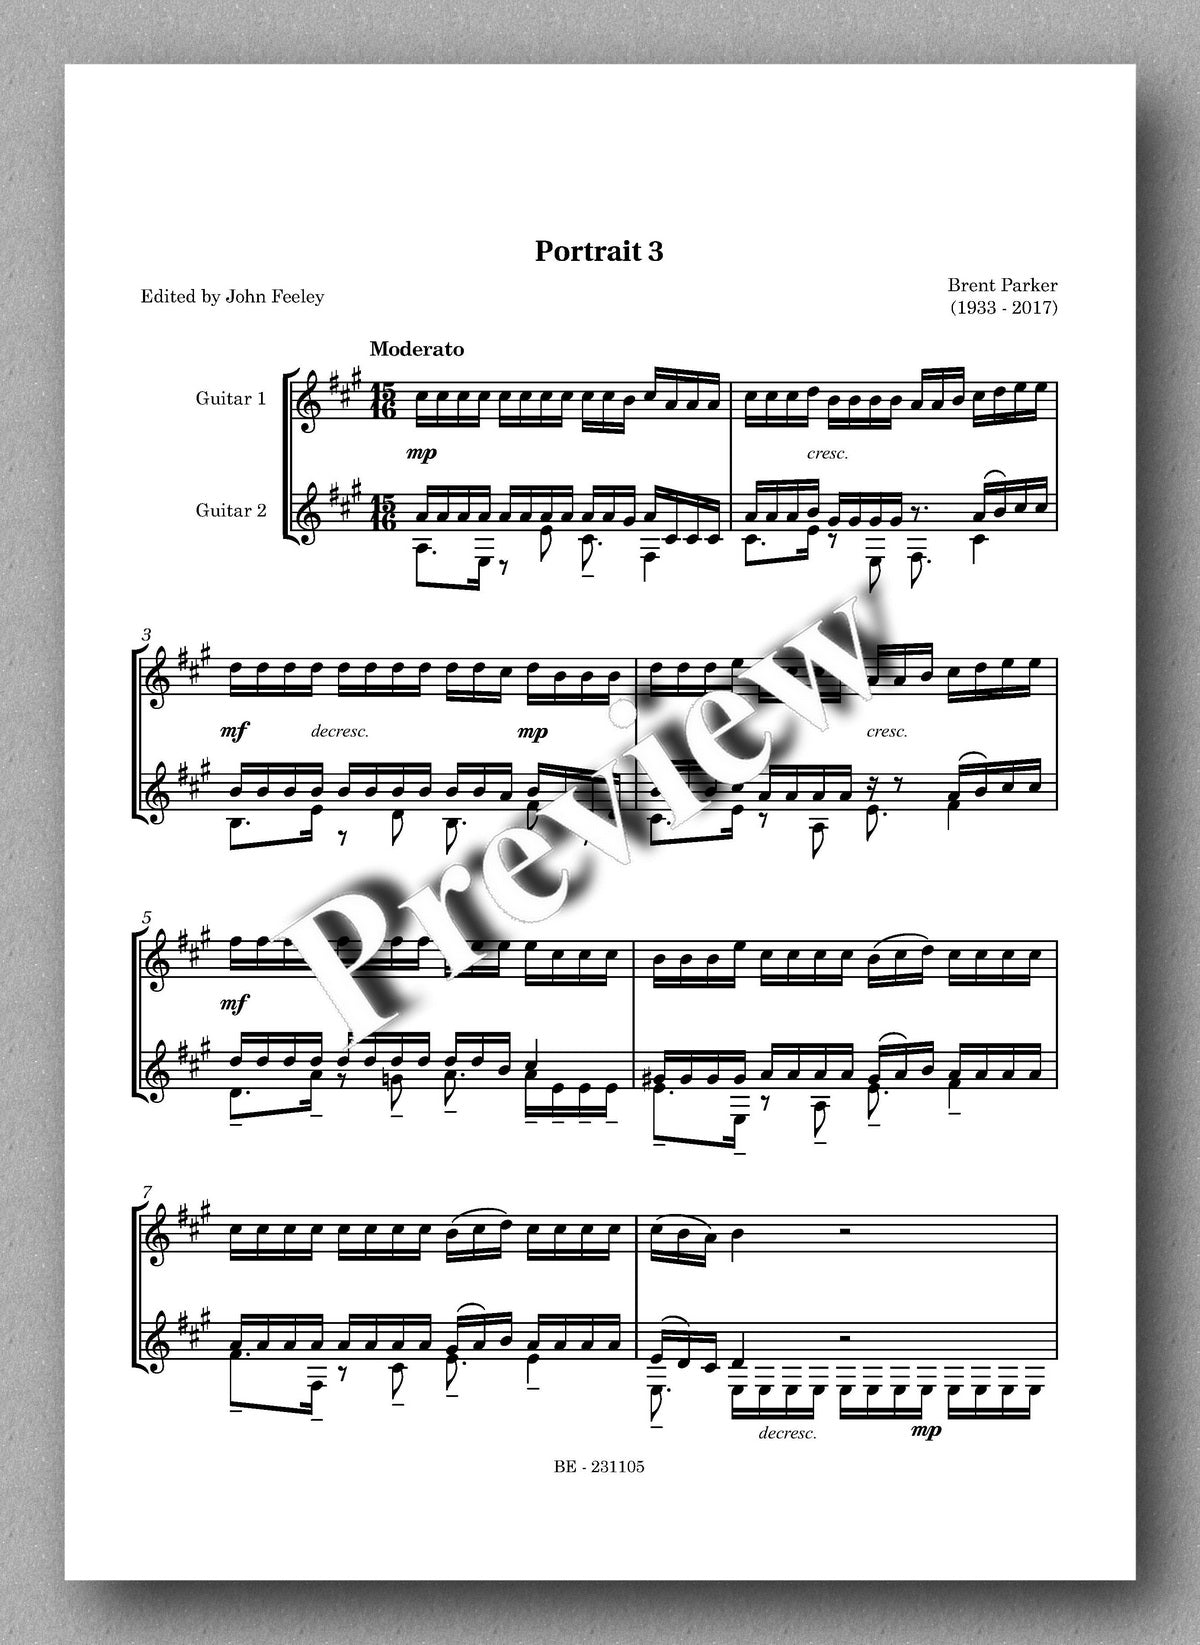 Five Portraits by Brent Parker - preview of the music score 3